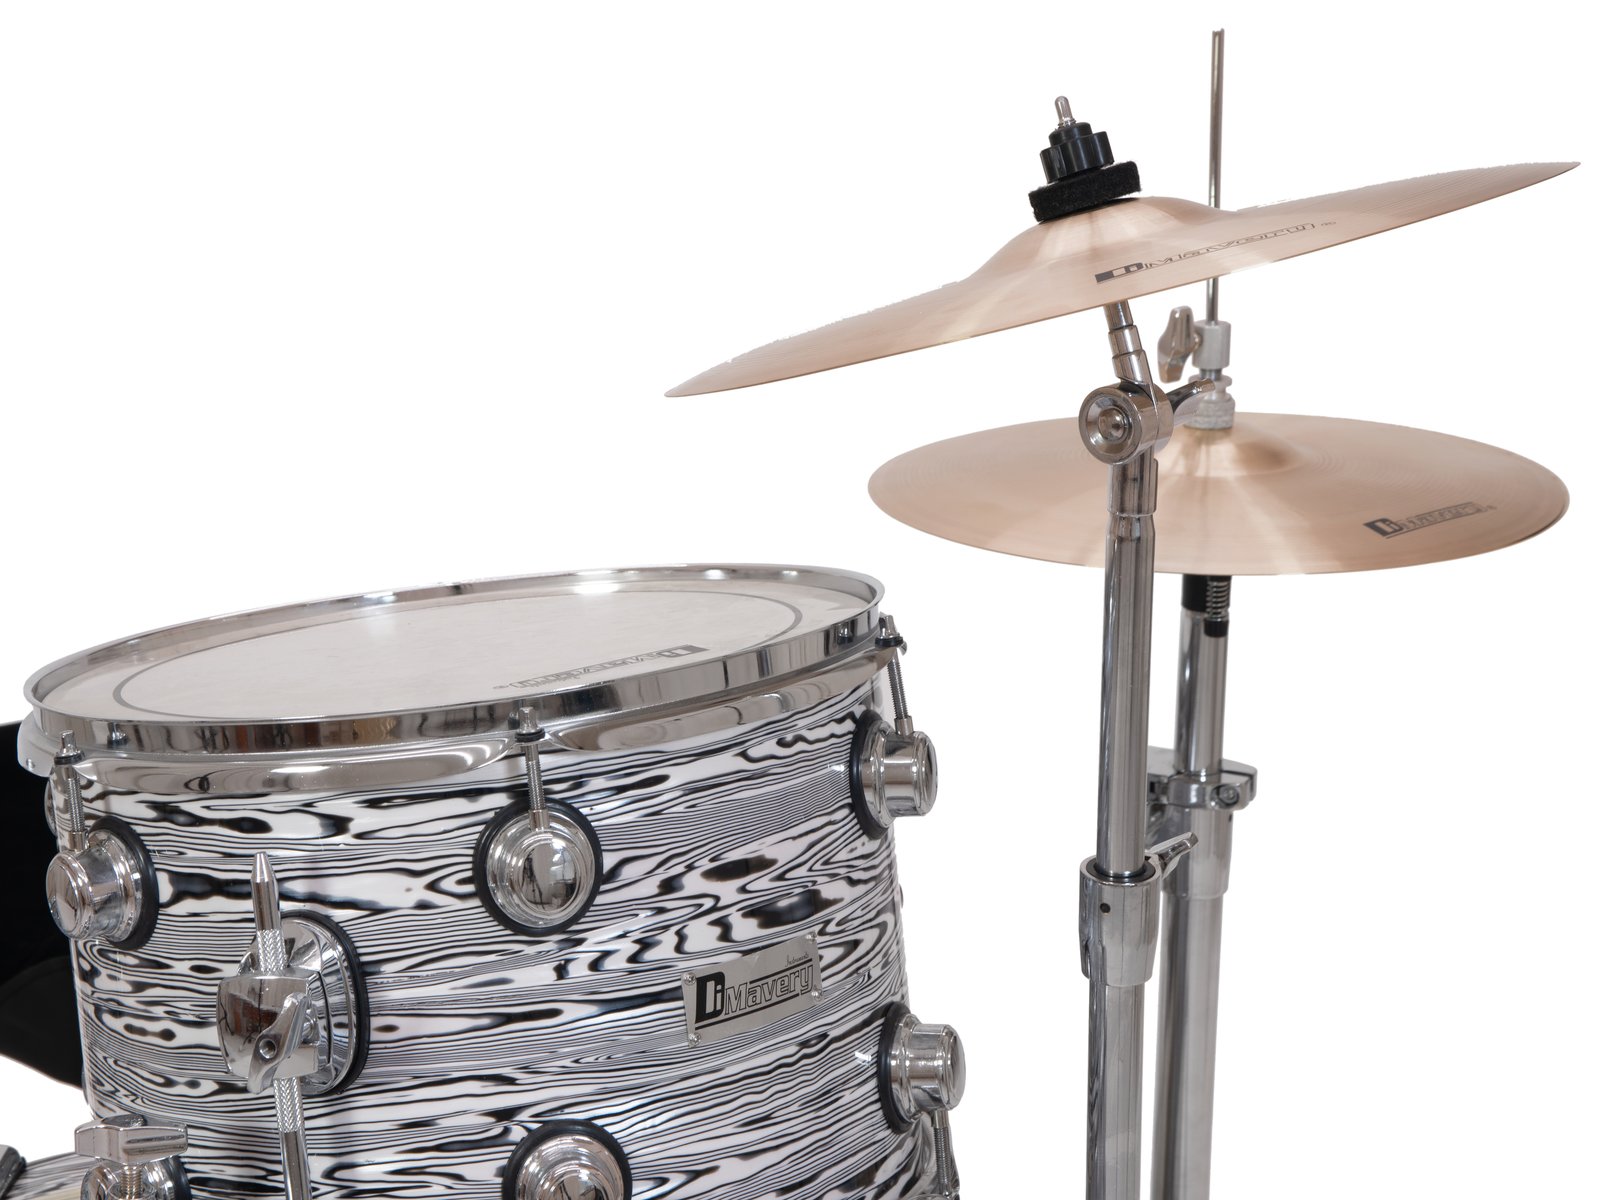 DIMAVERY DS-310 Fusion drum set,oyster